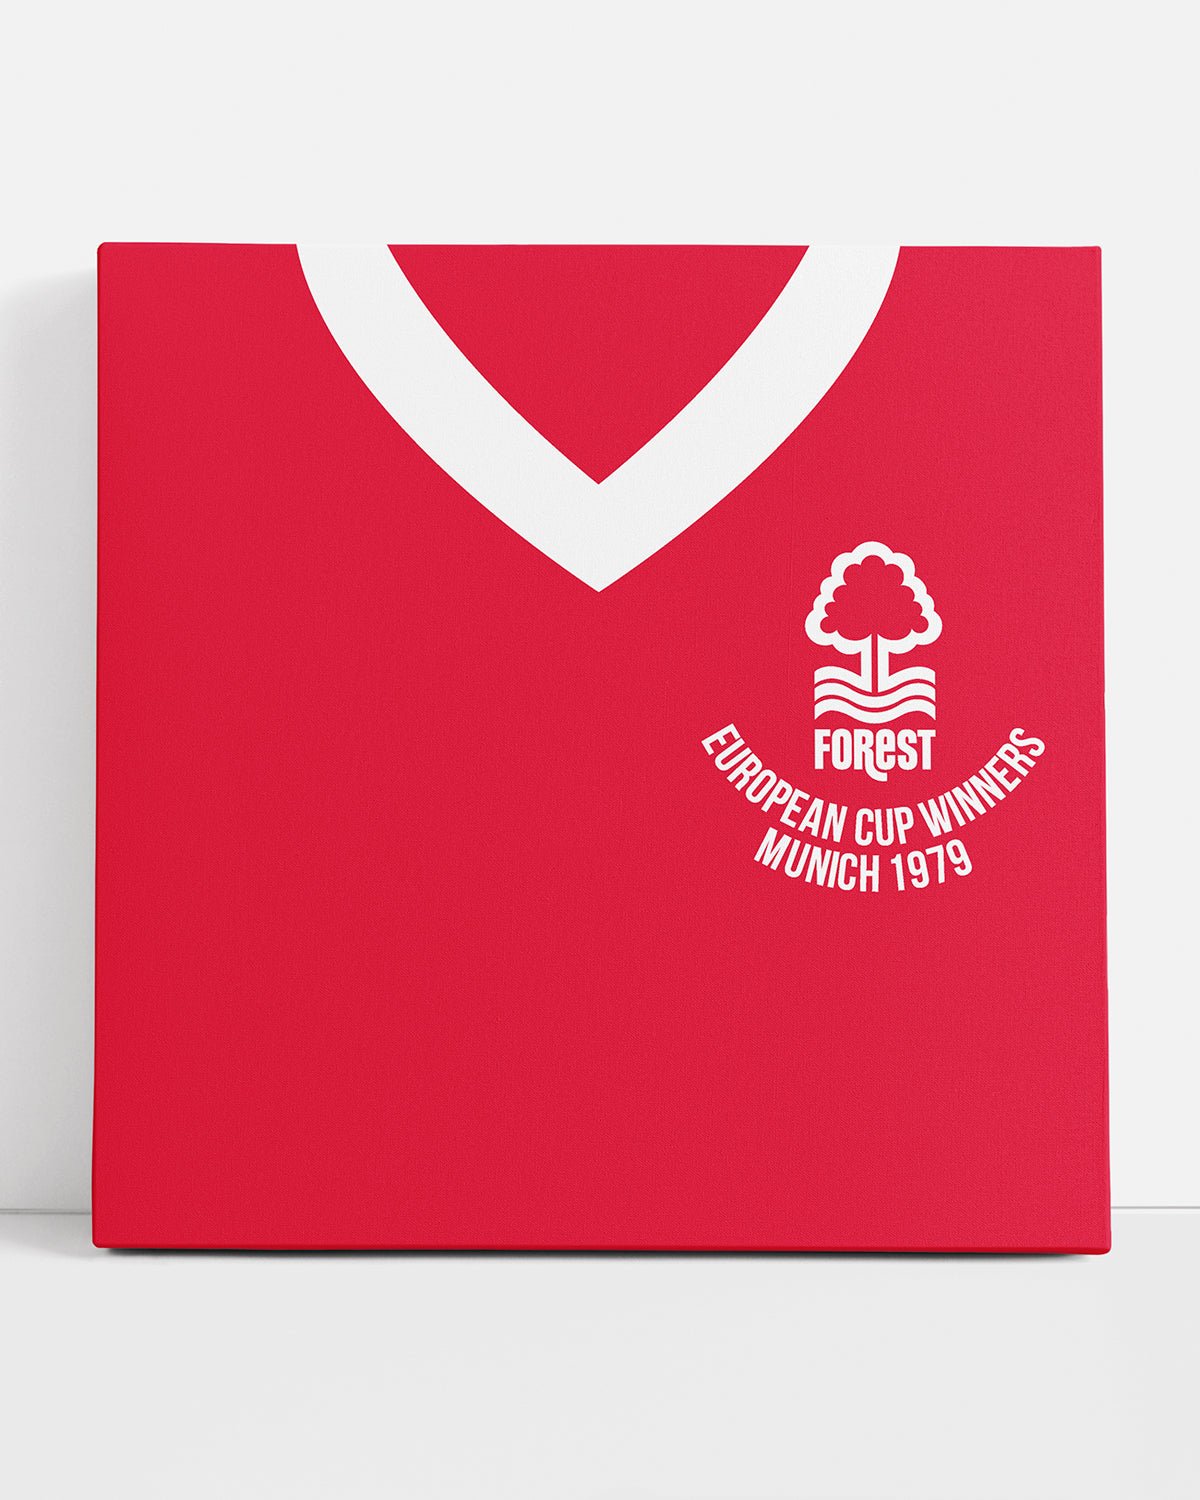 NFFC 1979 Retro Canvas - Nottingham Forest FC